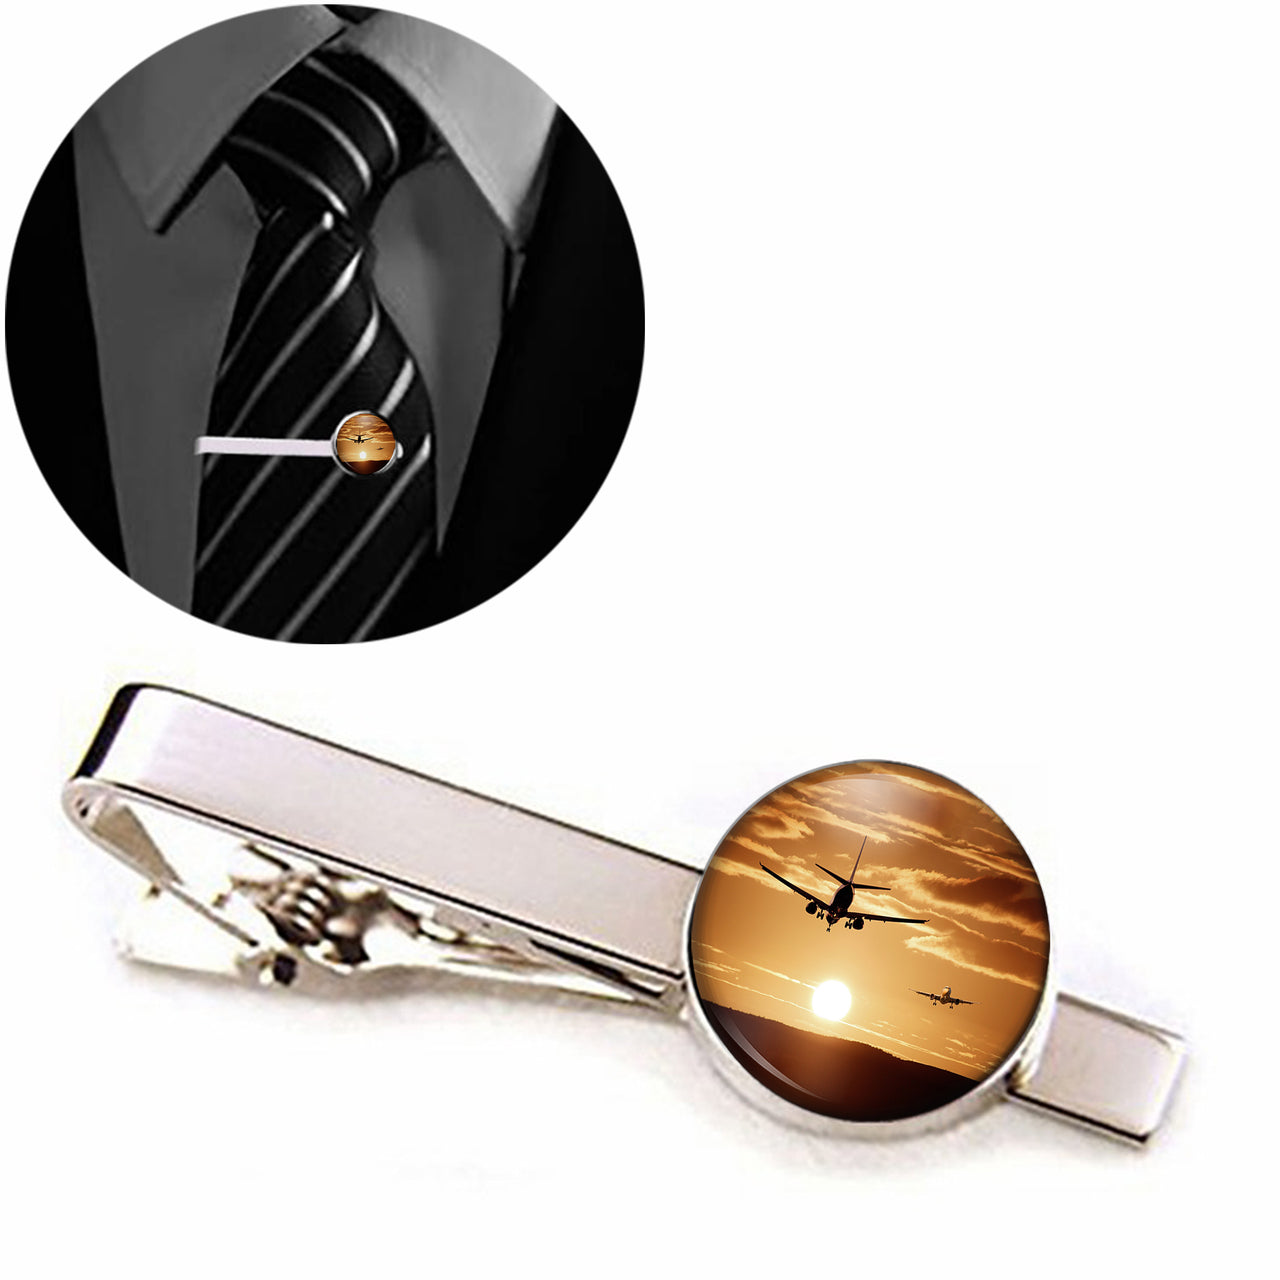 Two Aeroplanes During Sunset Designed Tie Clips